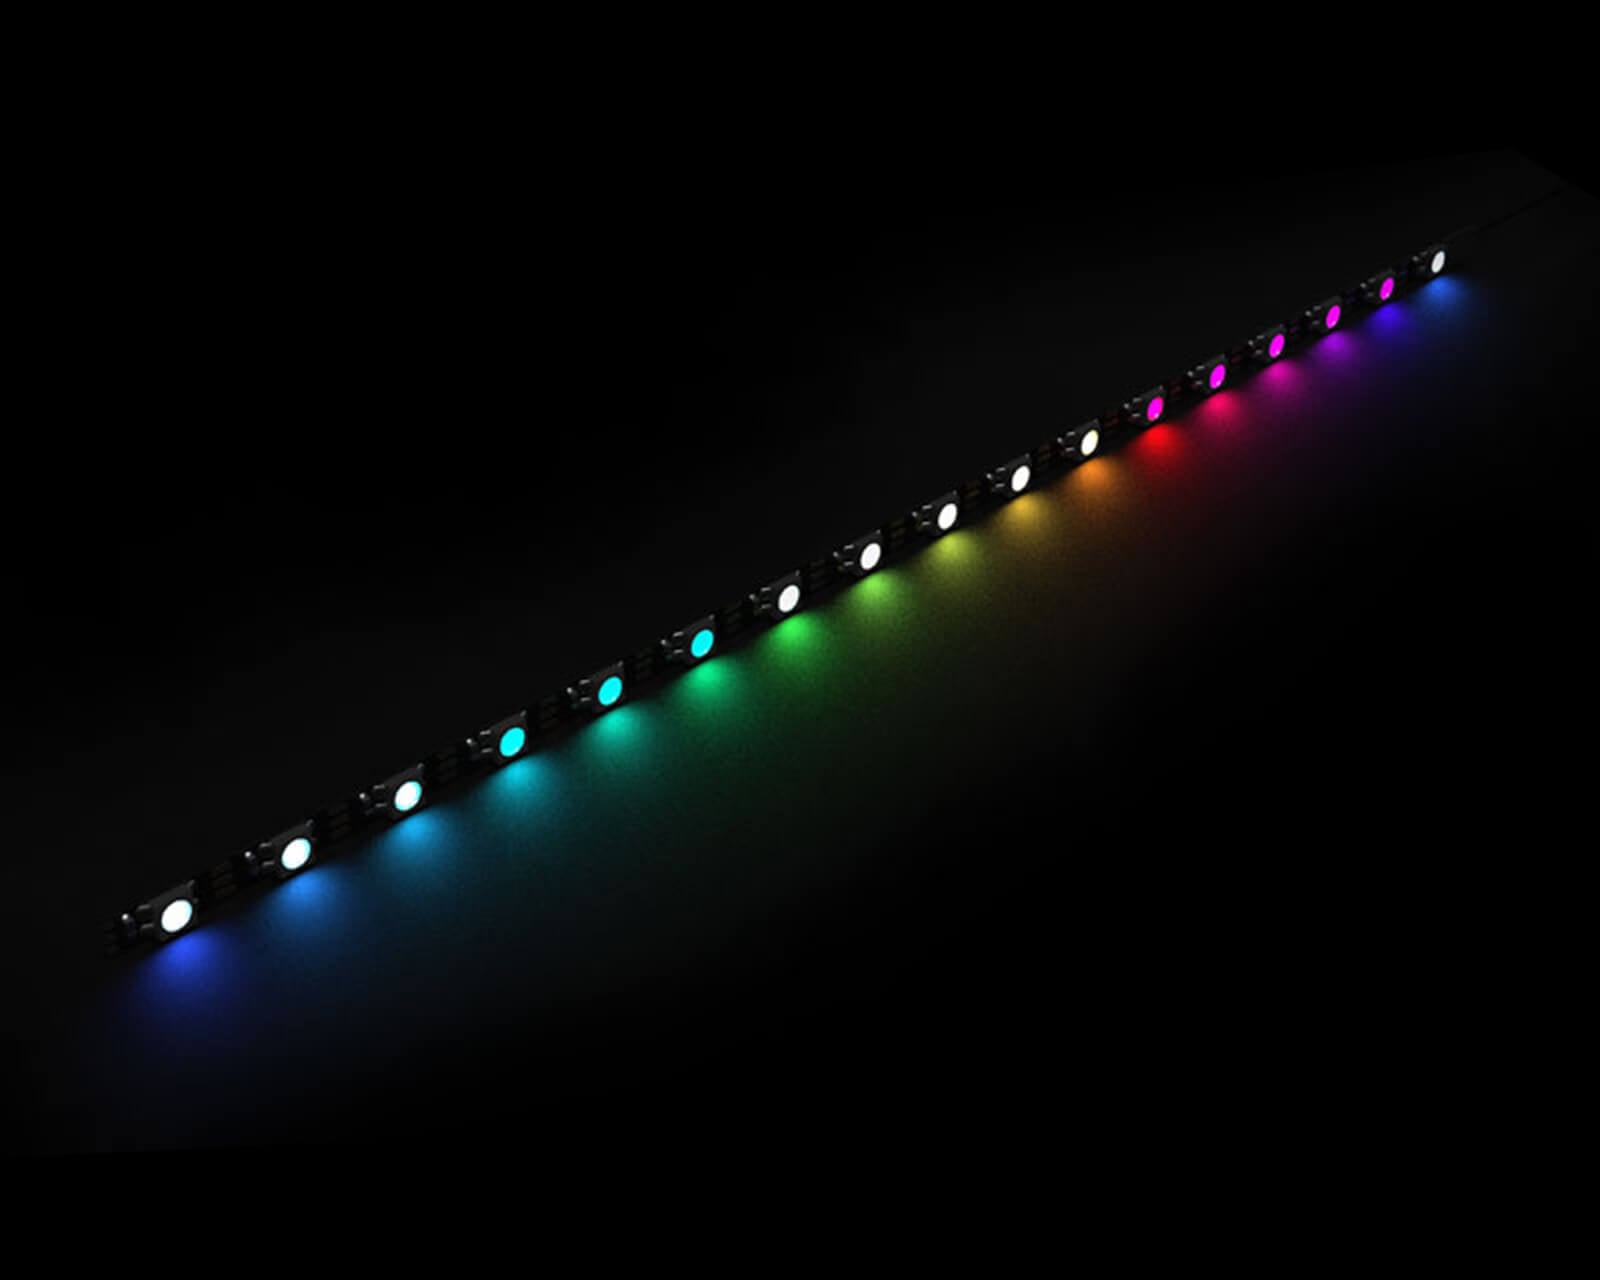 Bykski Replacement Flexible 5v Addressable RGB (RBW) LED Strip - PrimoChill - KEEPING IT COOL